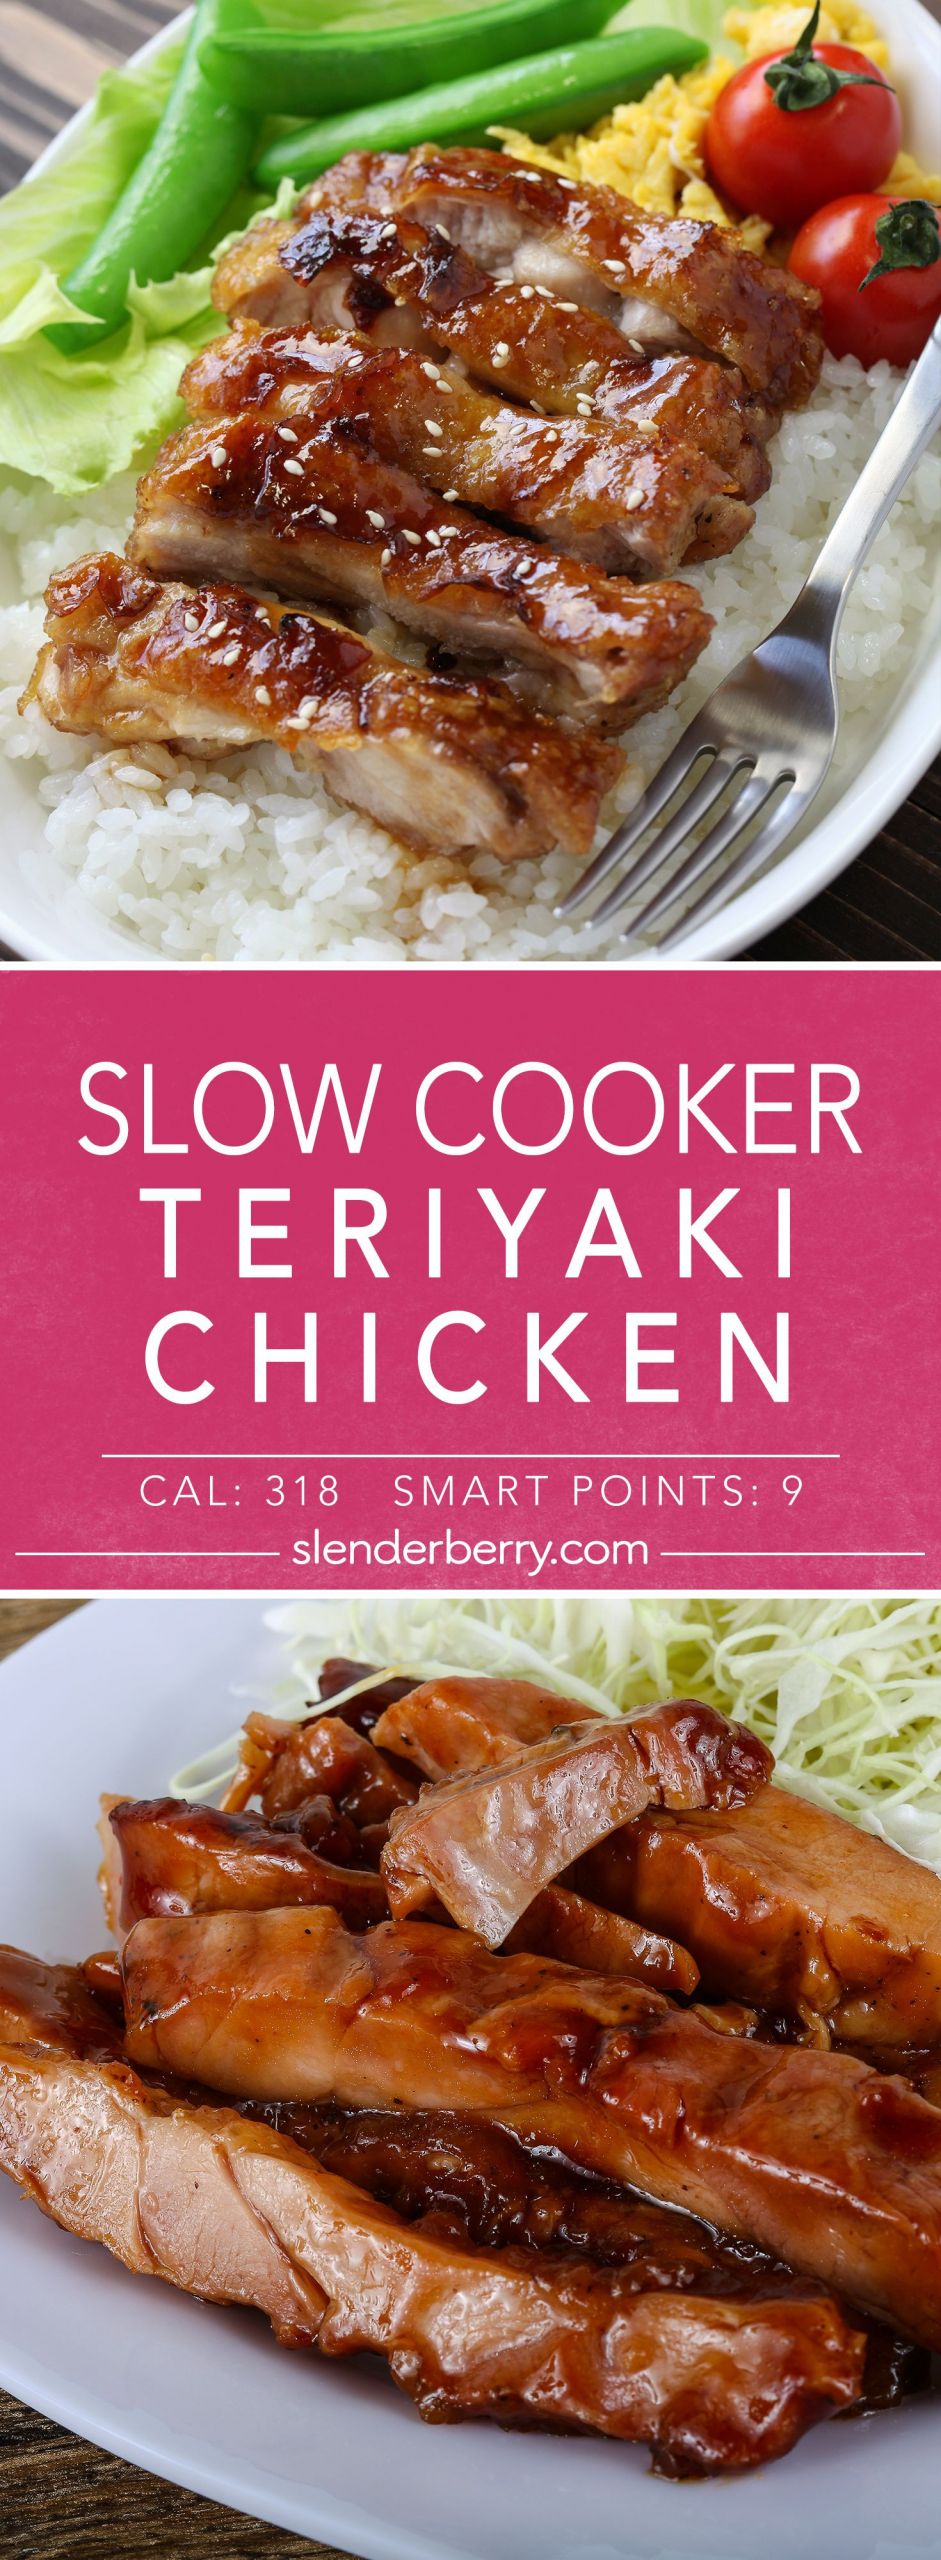 Slow Cooker Low Calorie Recipes
 Slow Cooker Teriyaki Chicken Recipe